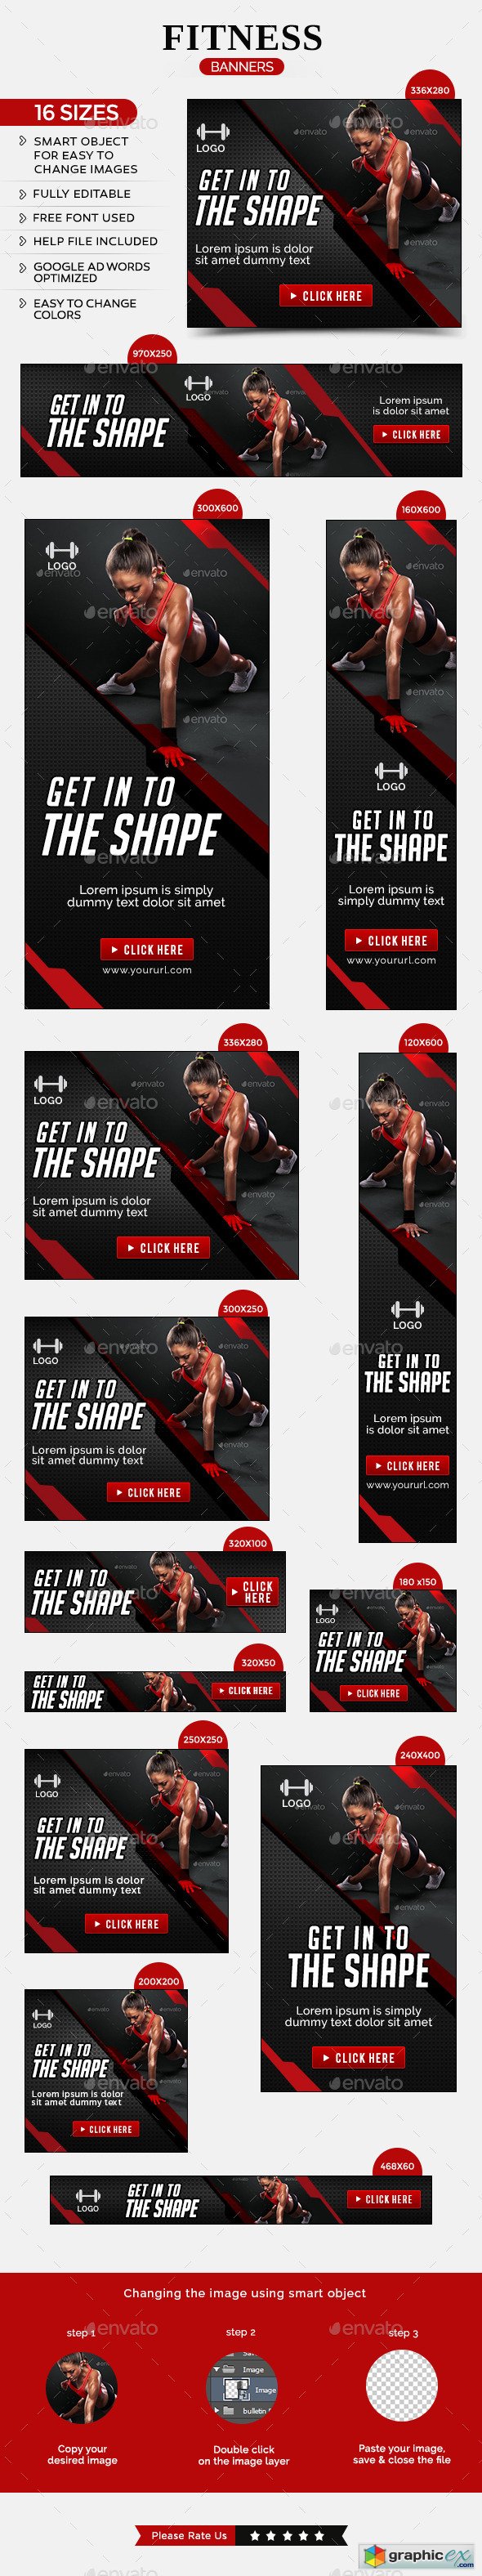 Fitness Banners